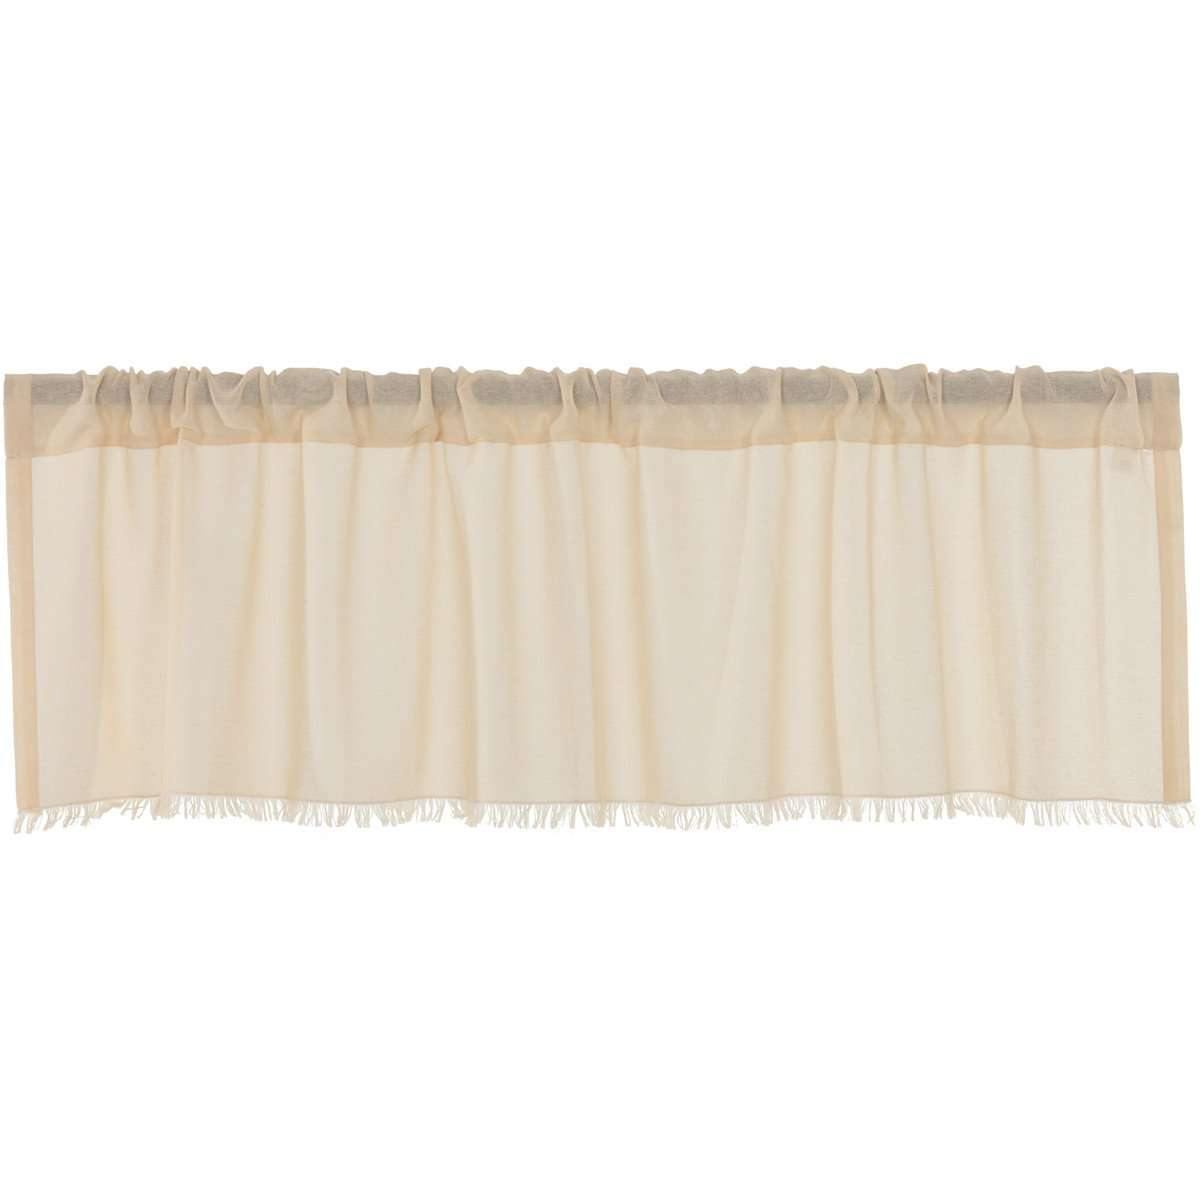 Tobacco Cloth Natural Valance Fringed Curtain 16x60 VHC Brands - The Fox Decor